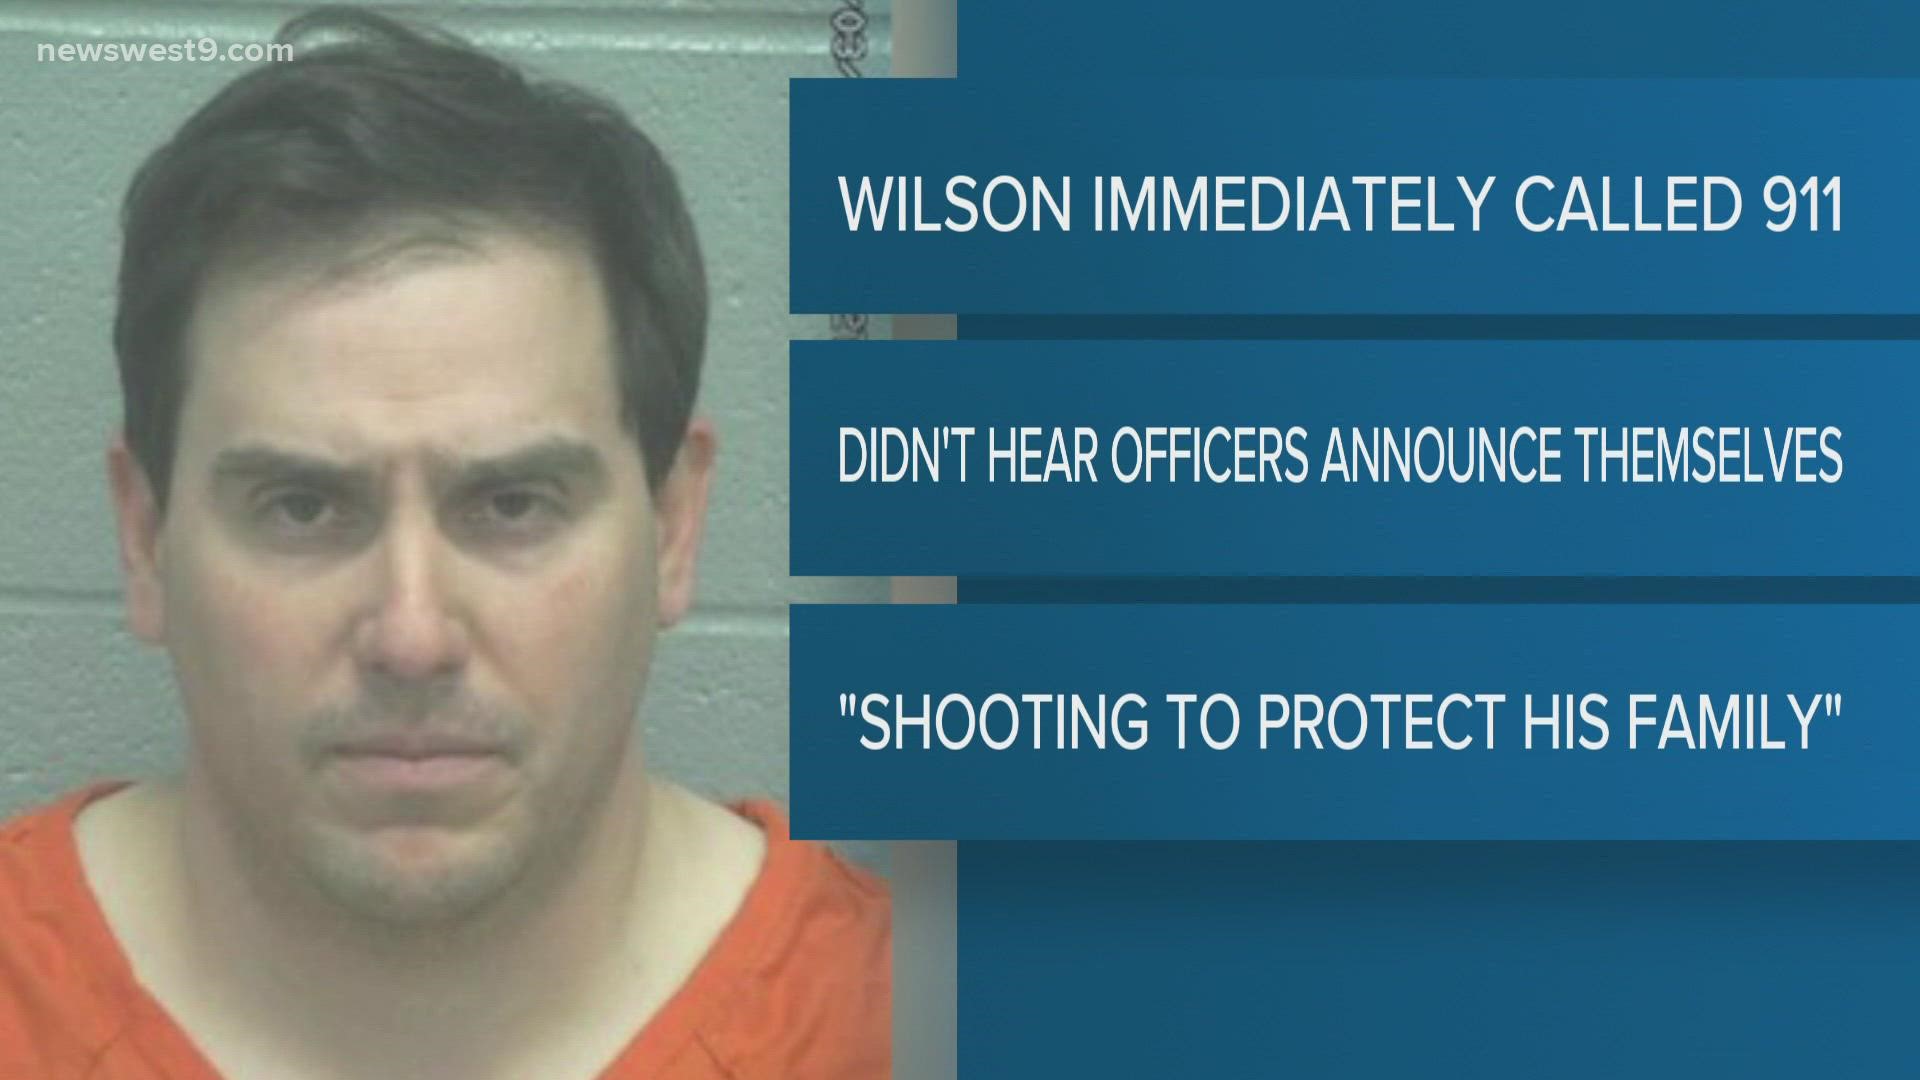 Day two of the trial saw testimony from a Texas Ranger and video of David Wilson following the shooting.